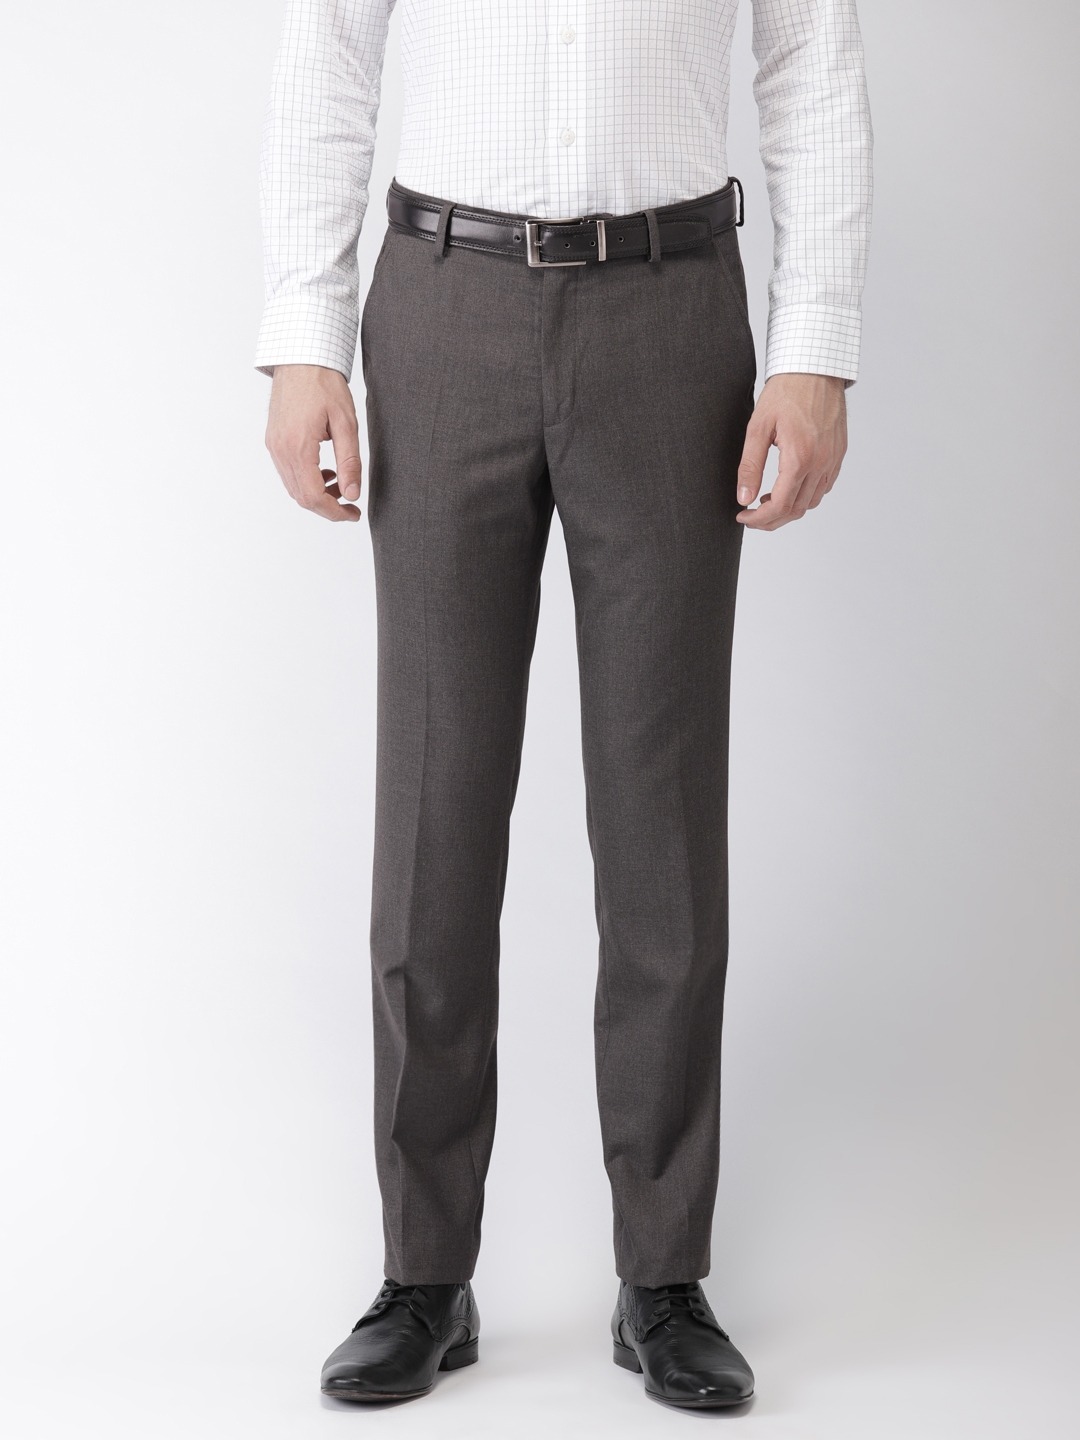 Buy Black Coffee Charcoal Grey Formal Trousers - Trousers for Men ...